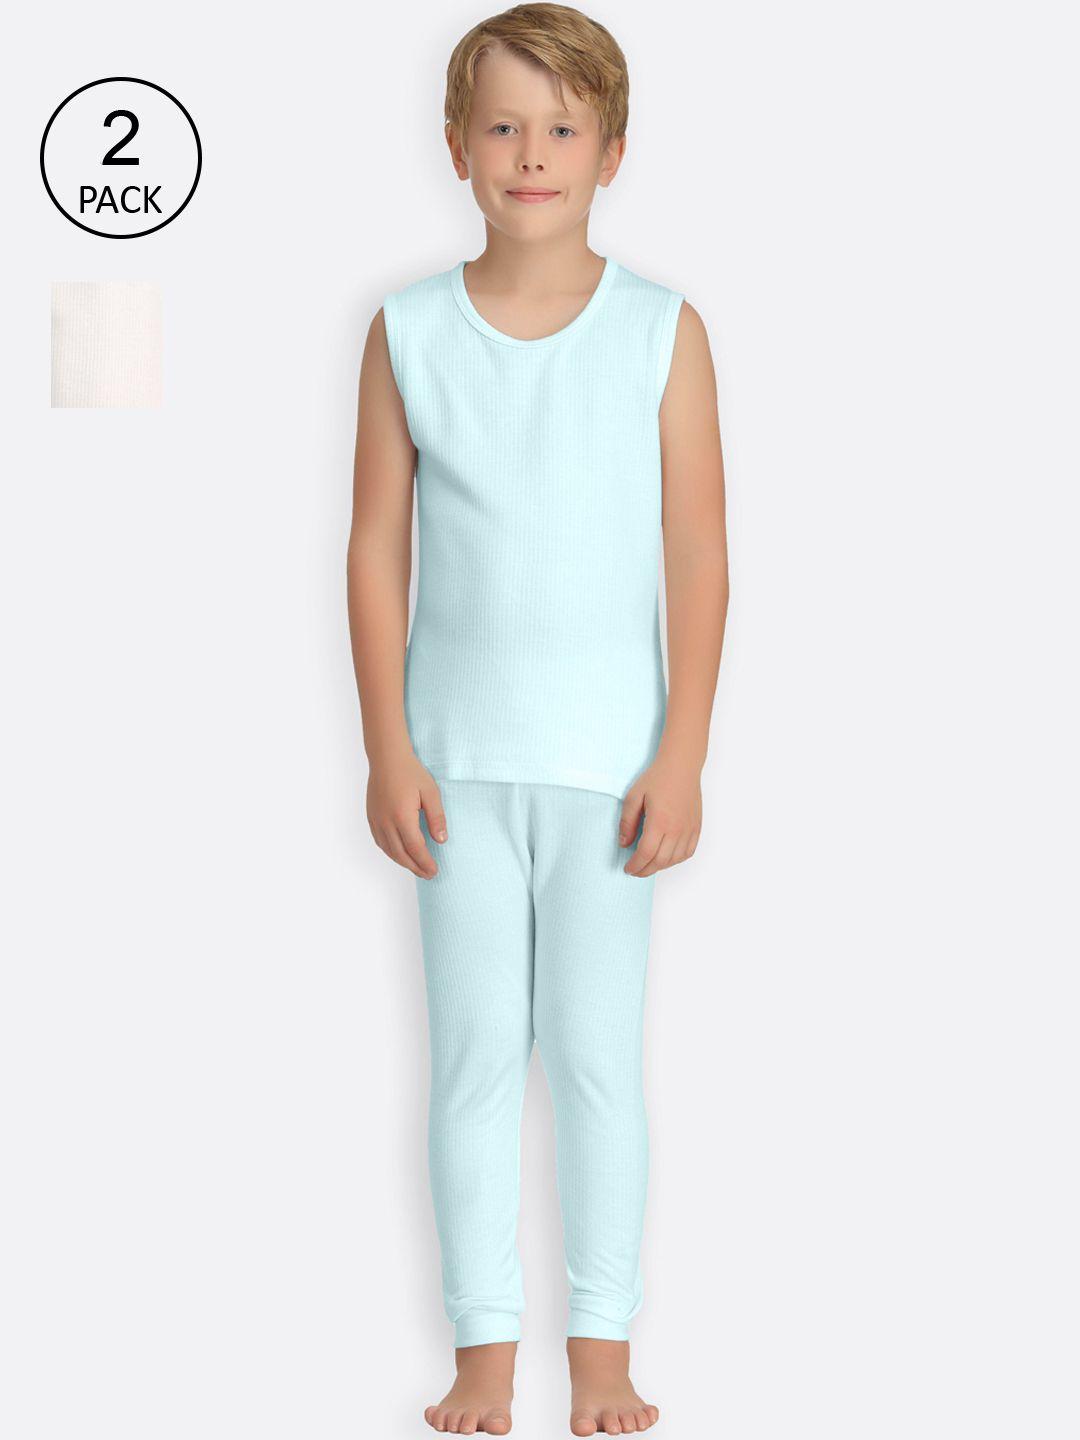 kanvin-boys-turquoise-blue-&-off-white-set-of-2-self-striped-thermal-set